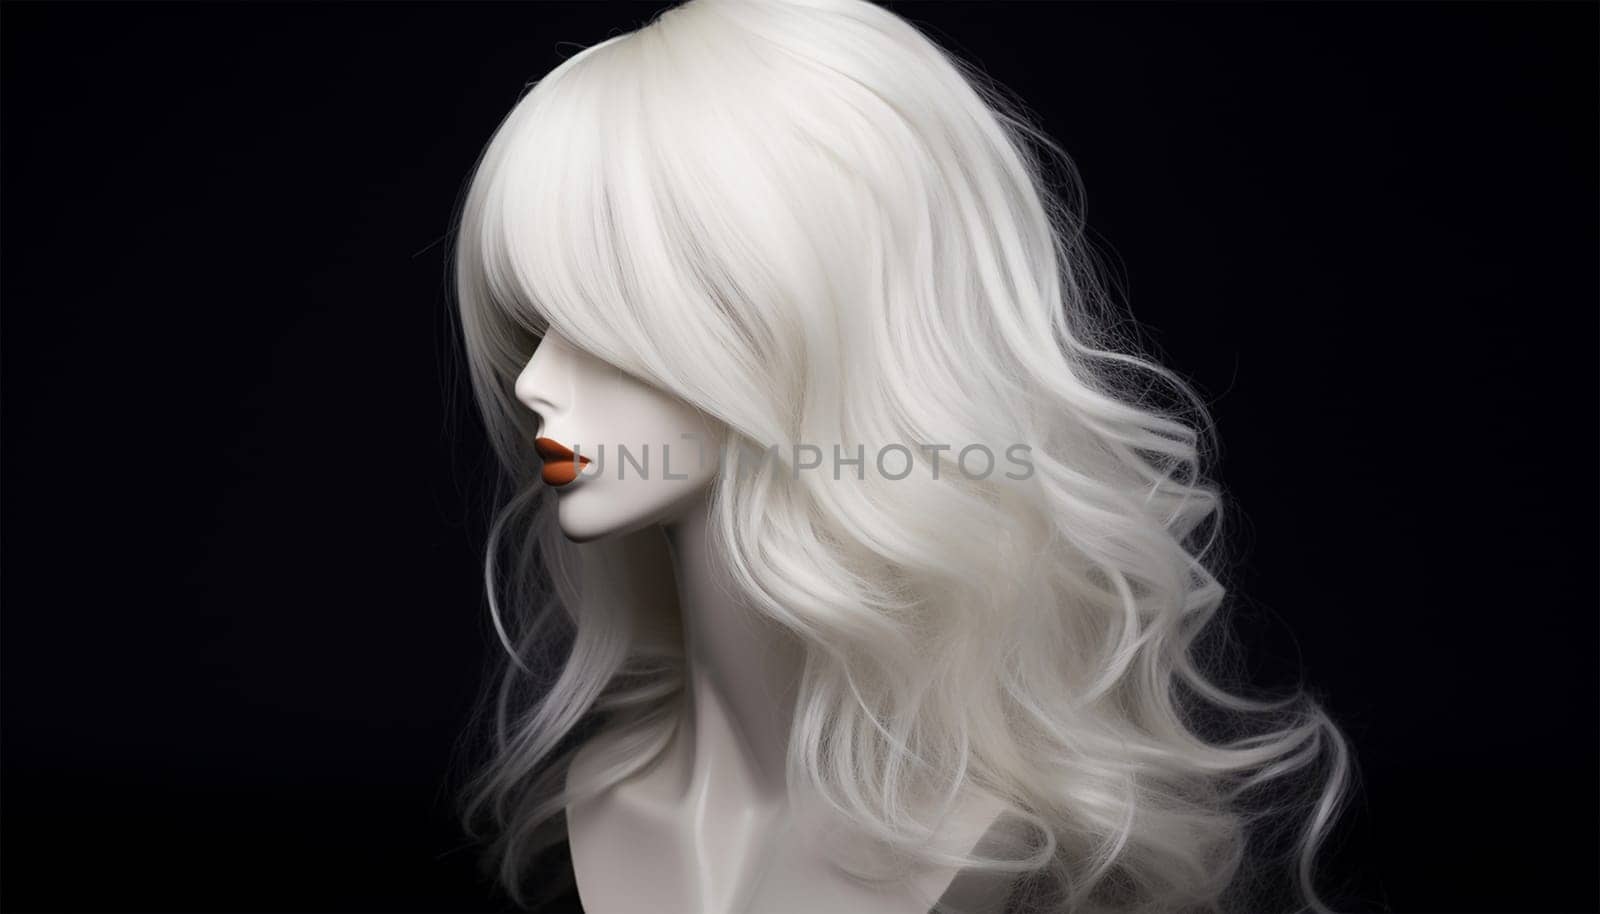 Natural looking blonde wig on white mannequin head. Long hair on the plastic wig holder isolated on black background, front view woman design beauty product